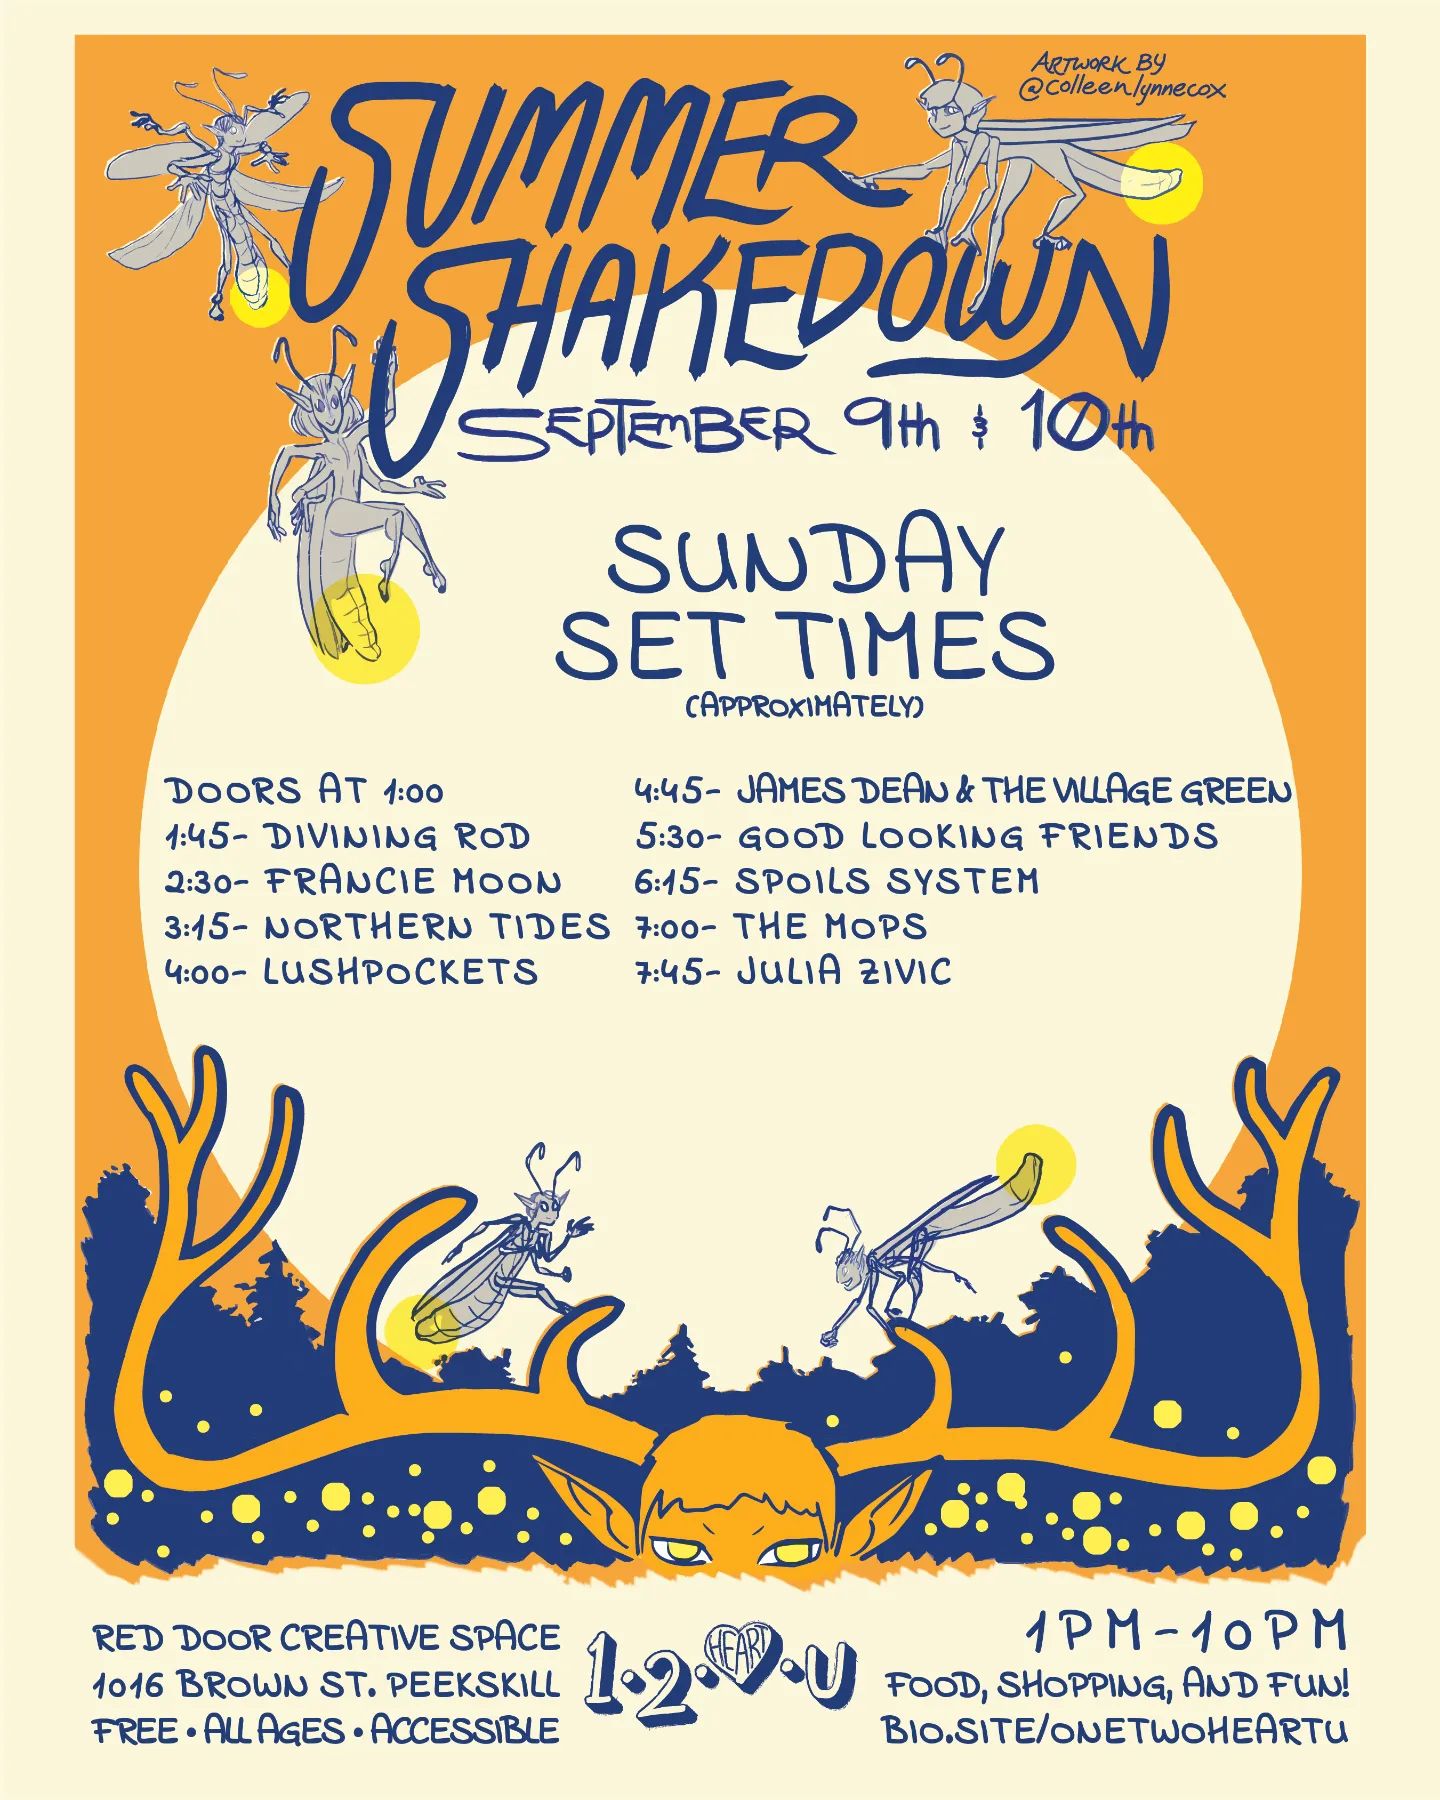 Day 2 of the Summer Shakedown, coming at ya!
Please note, we lost Northern Tides and Lushpockets due to illness, so set 